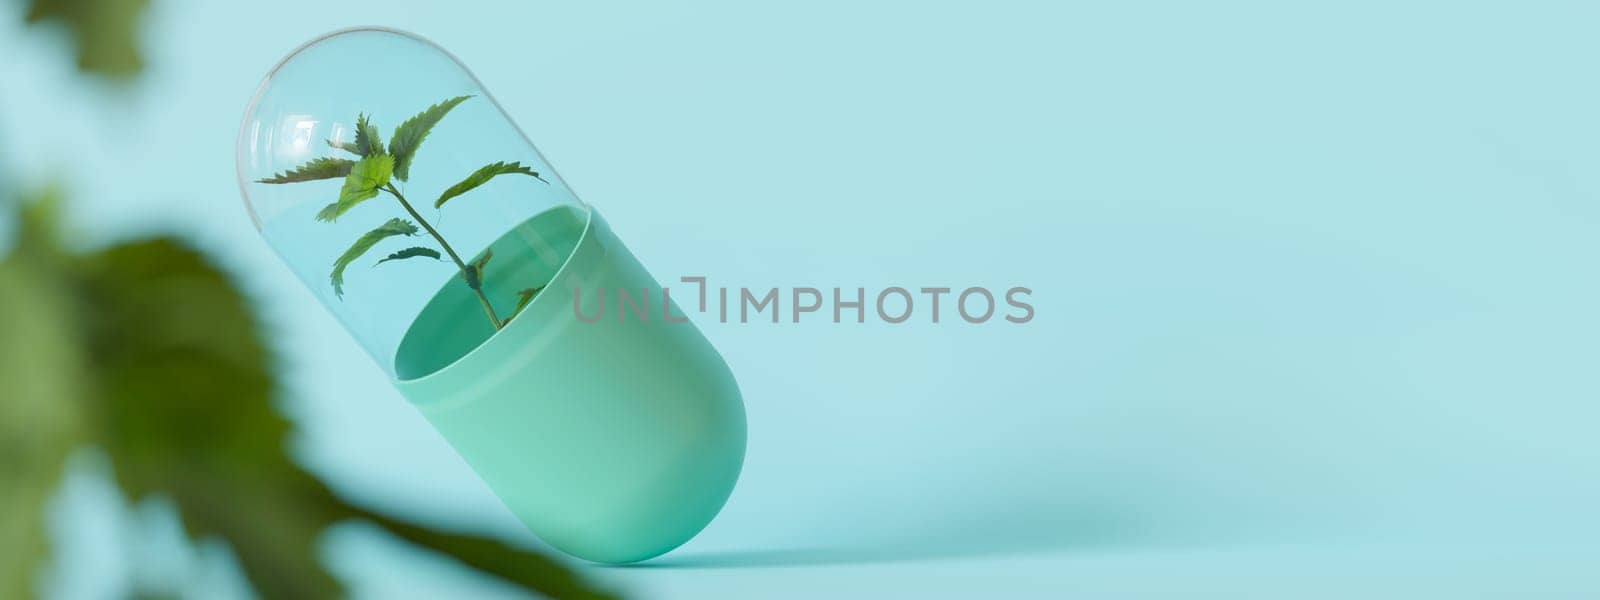 Elegant homeopathy capsule with a plant inside, conveying natural and alternative medicine concepts, ideal for wellness and healthcare imagery. Homeopathic therapy. Copy space for text. Banner. 3D. by creativebird